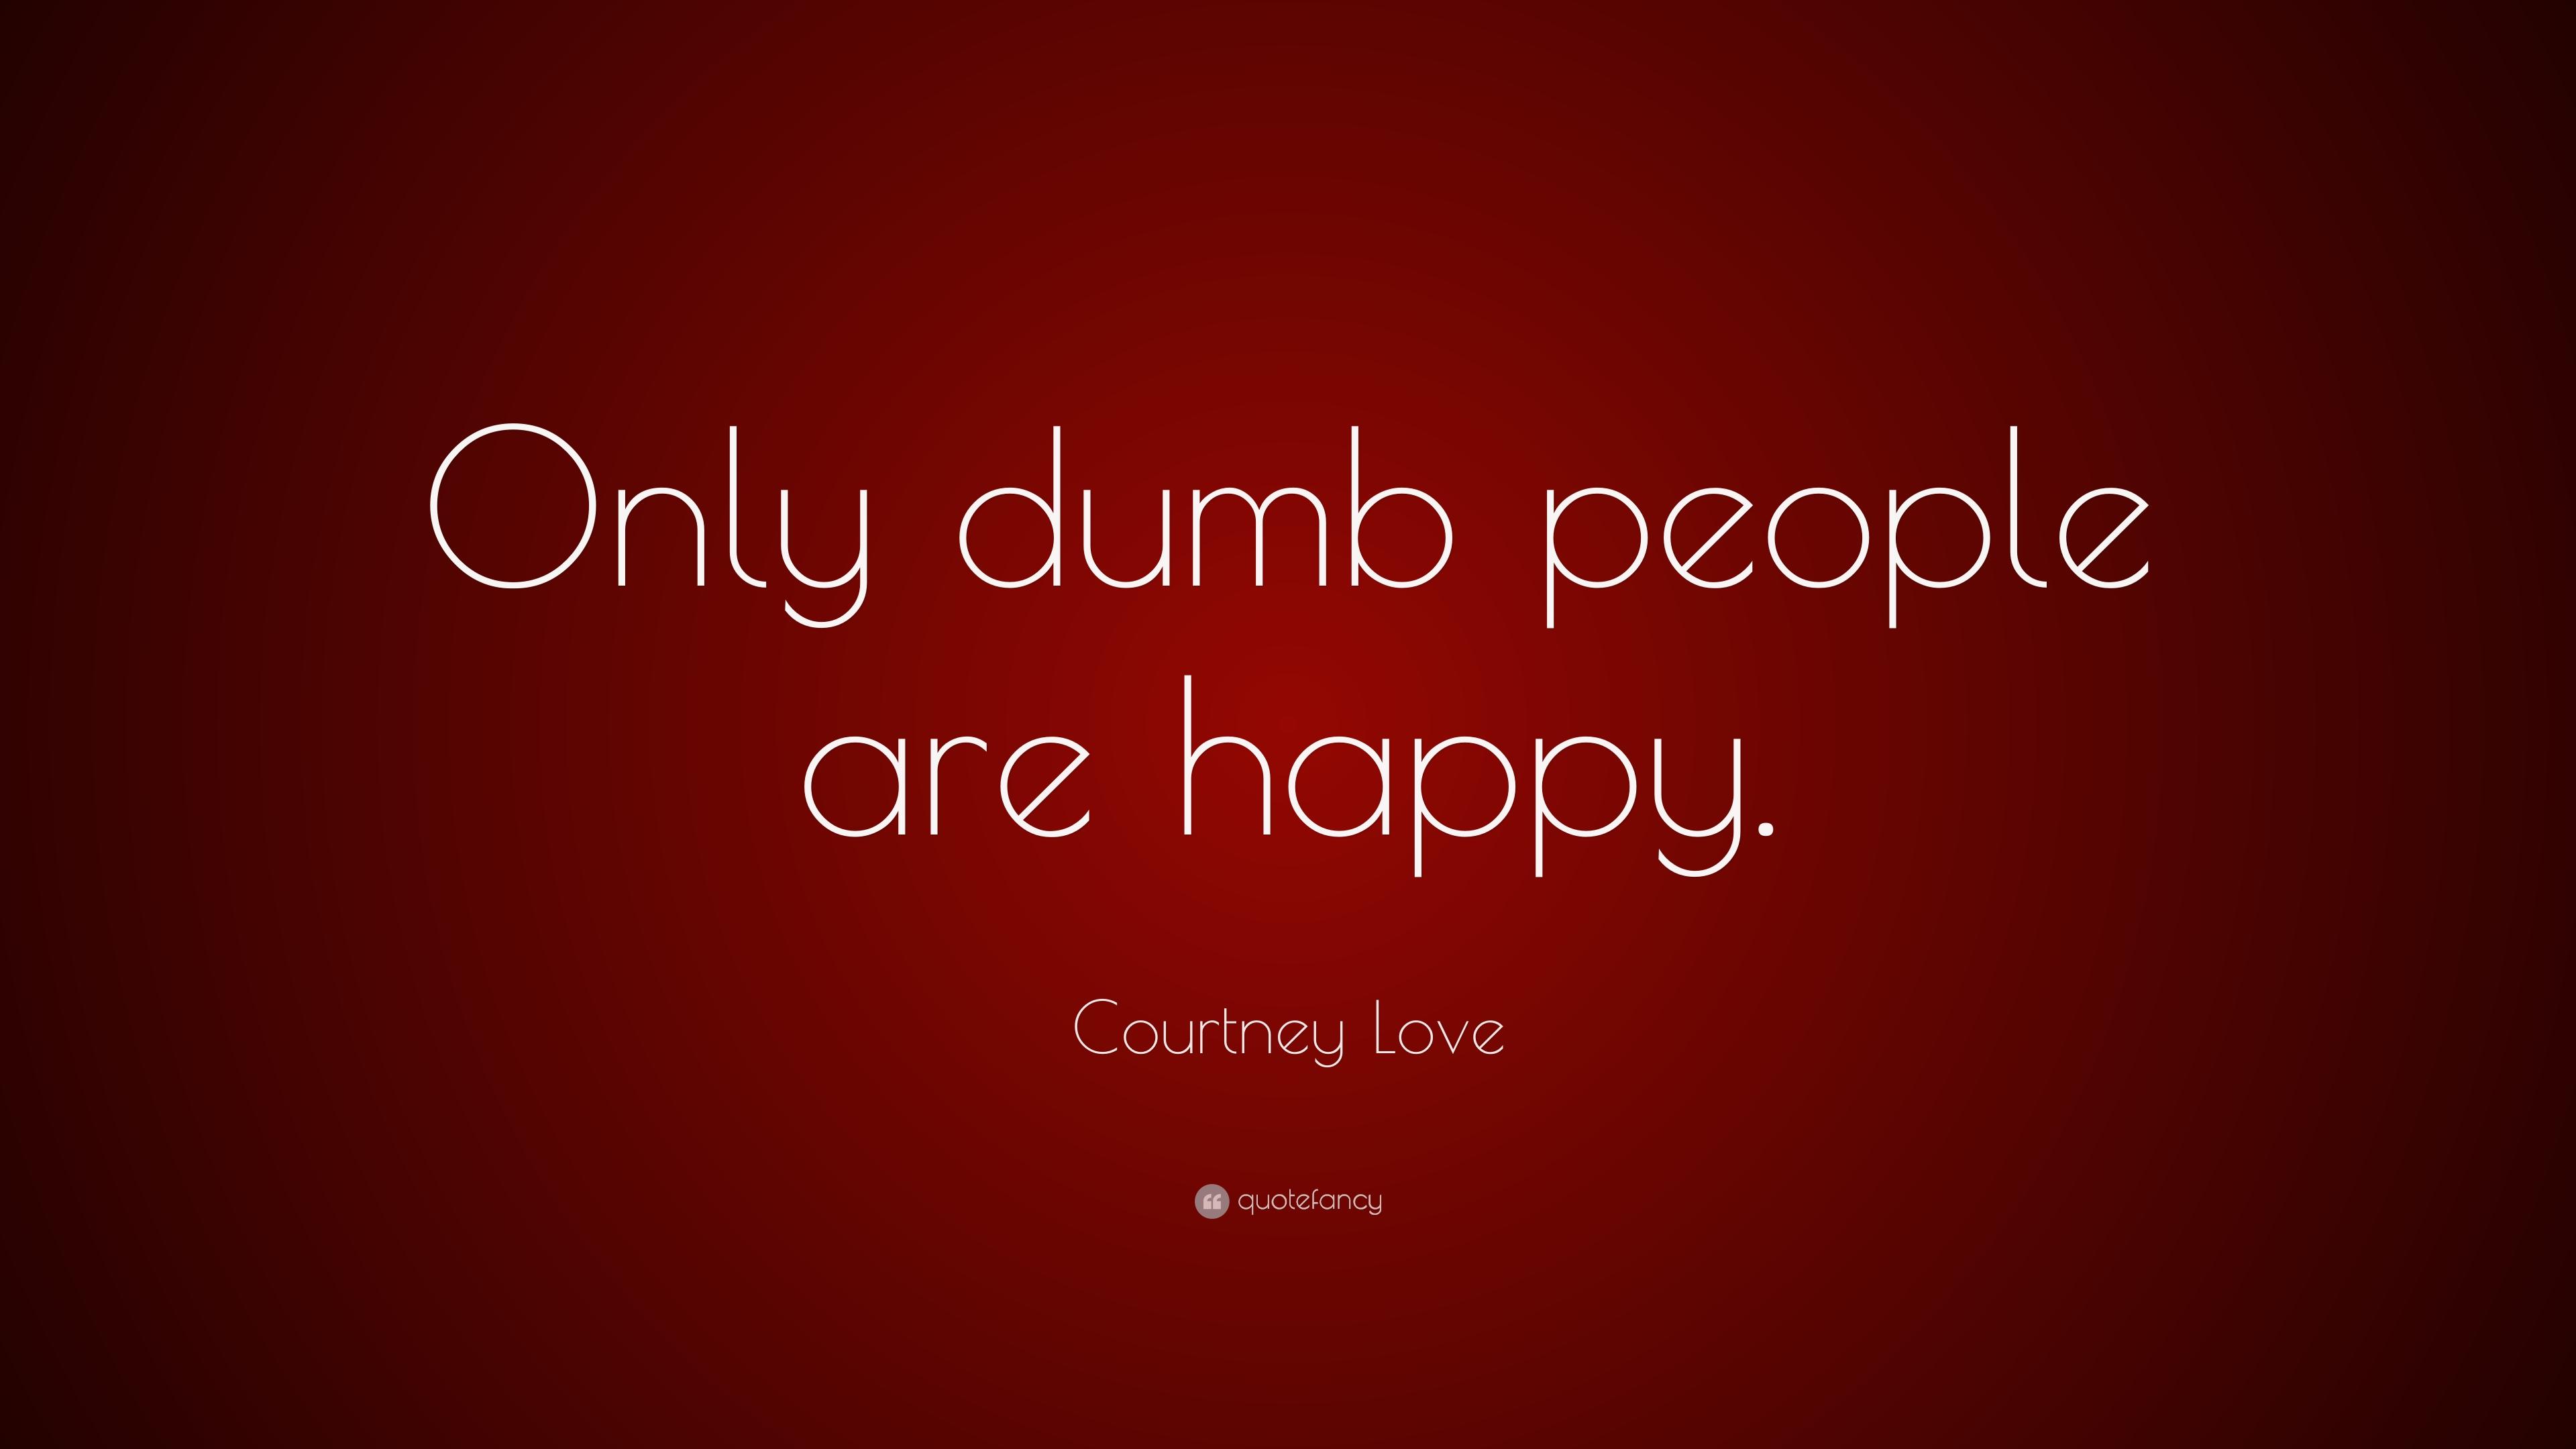 Courtney Love Quote: “Only dumb people are happy.” 7 wallpaper